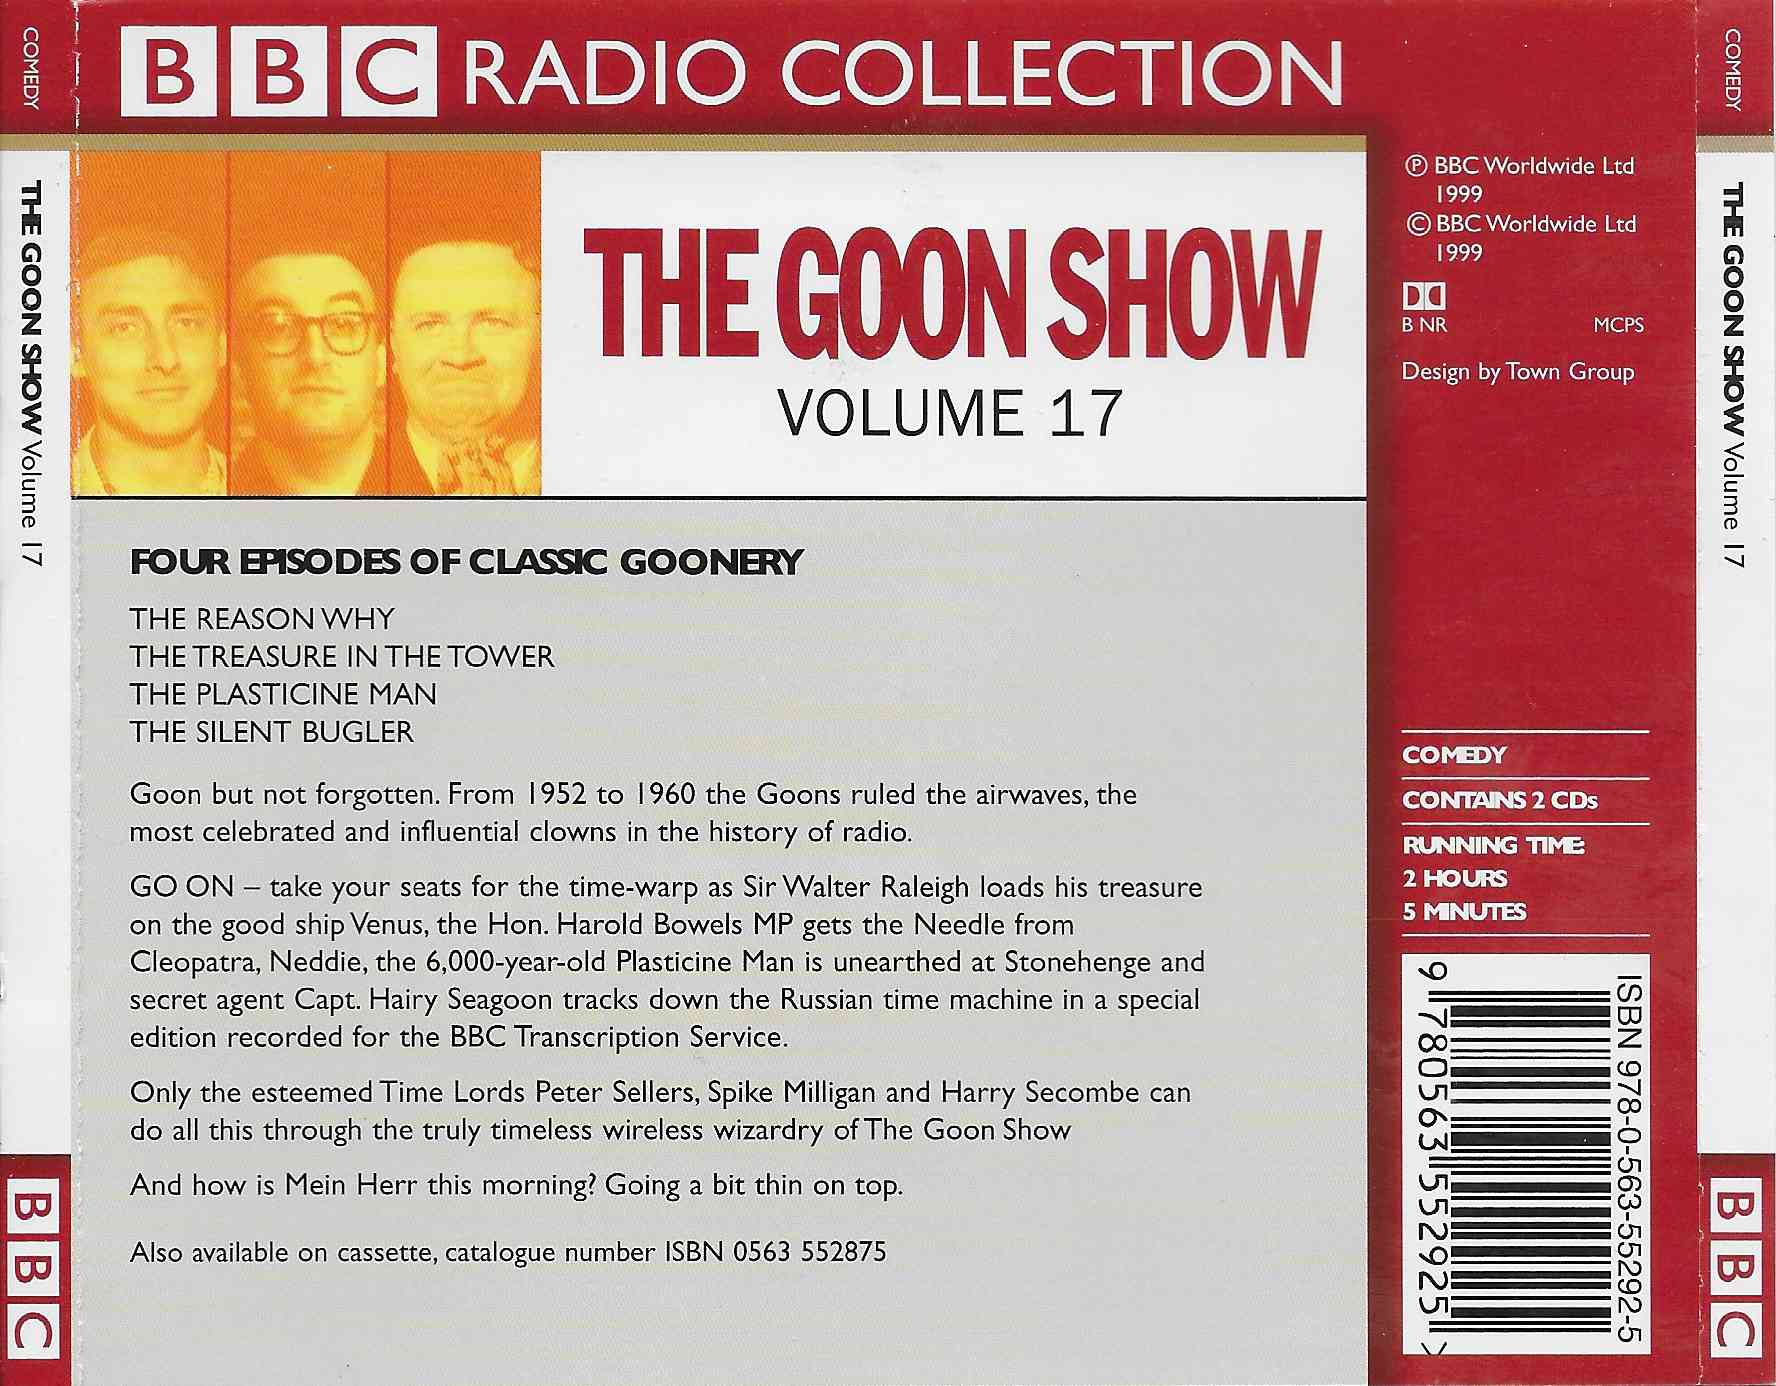 Picture of ISBN 978-0-563-55292-5 The Goon Show 17 - The silent bugler by artist Spike Milligan / Larry Stephens from the BBC records and Tapes library